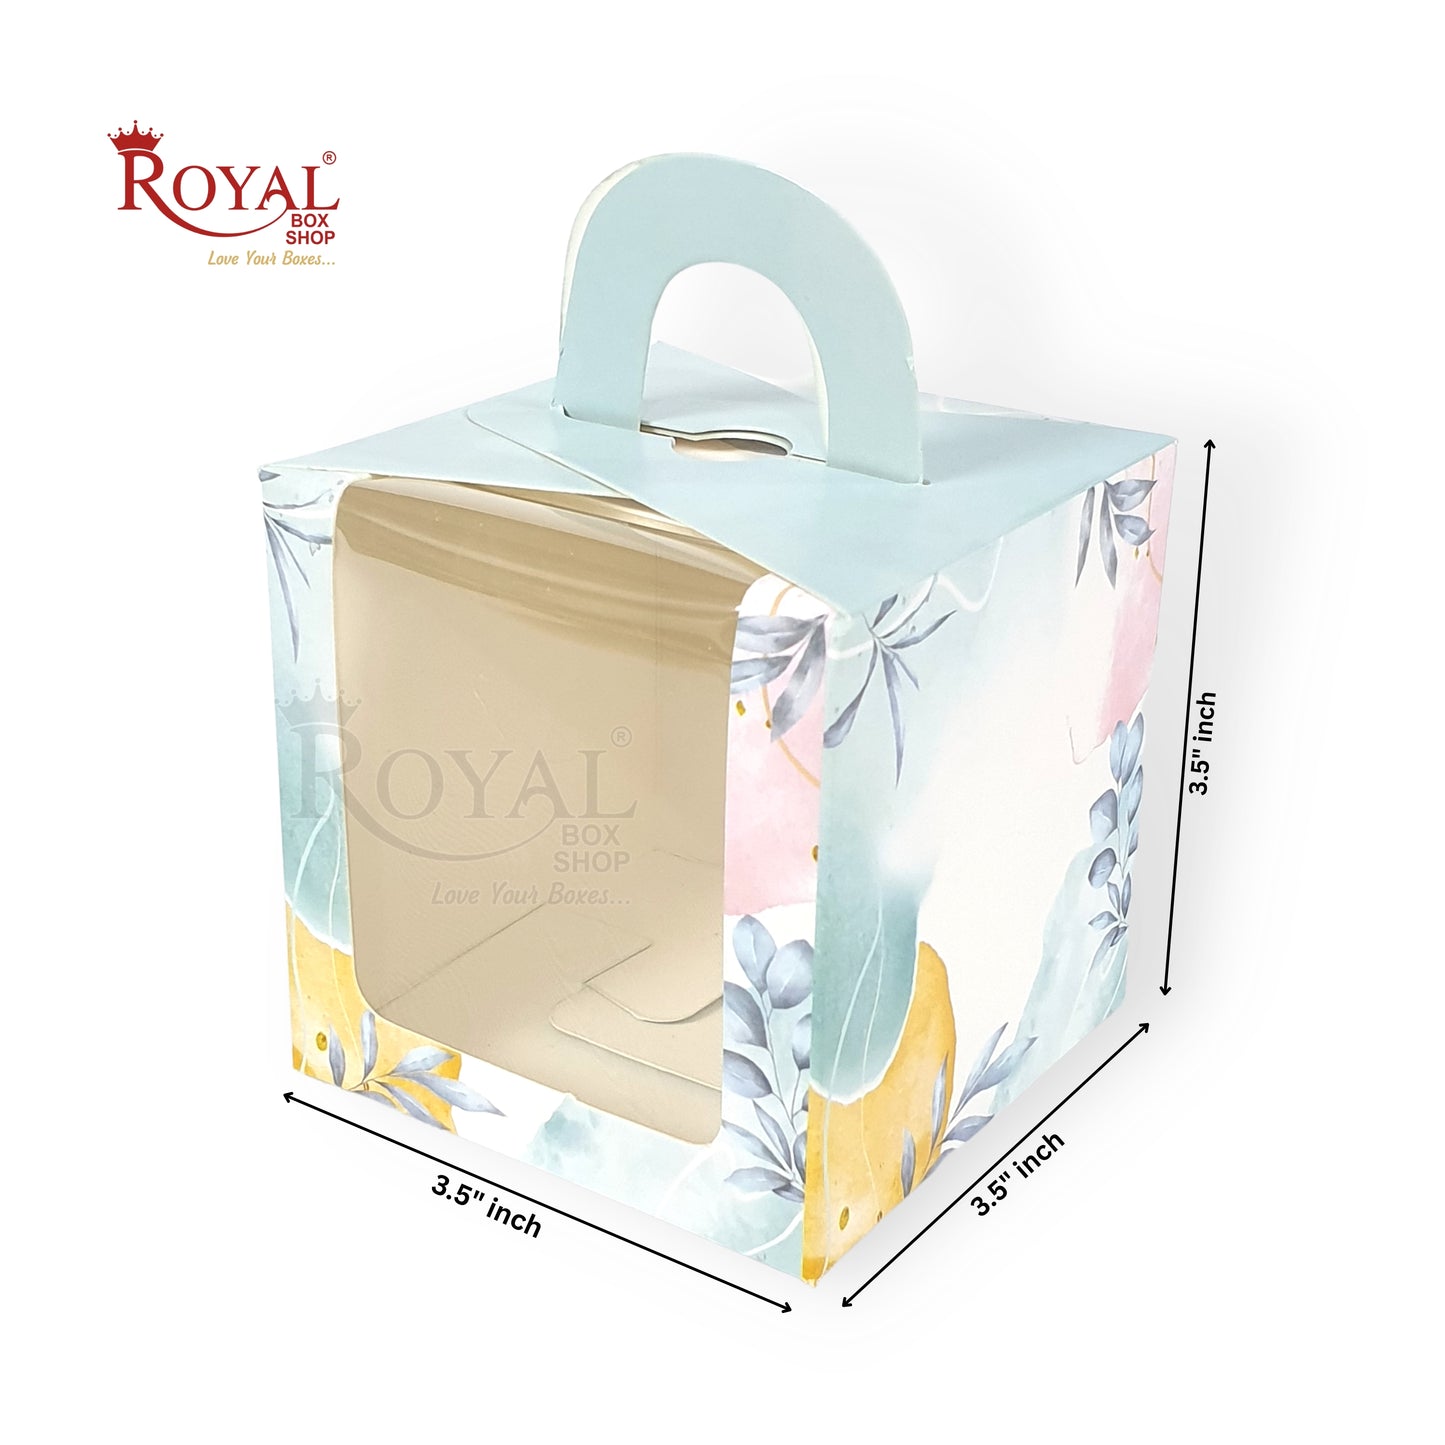 1pc Cupcake Box Window Flower Print I 3.5x3.5x3.5" I Single Cupcake Packaging Boxes, Cookie Boxes, Candy Boxes